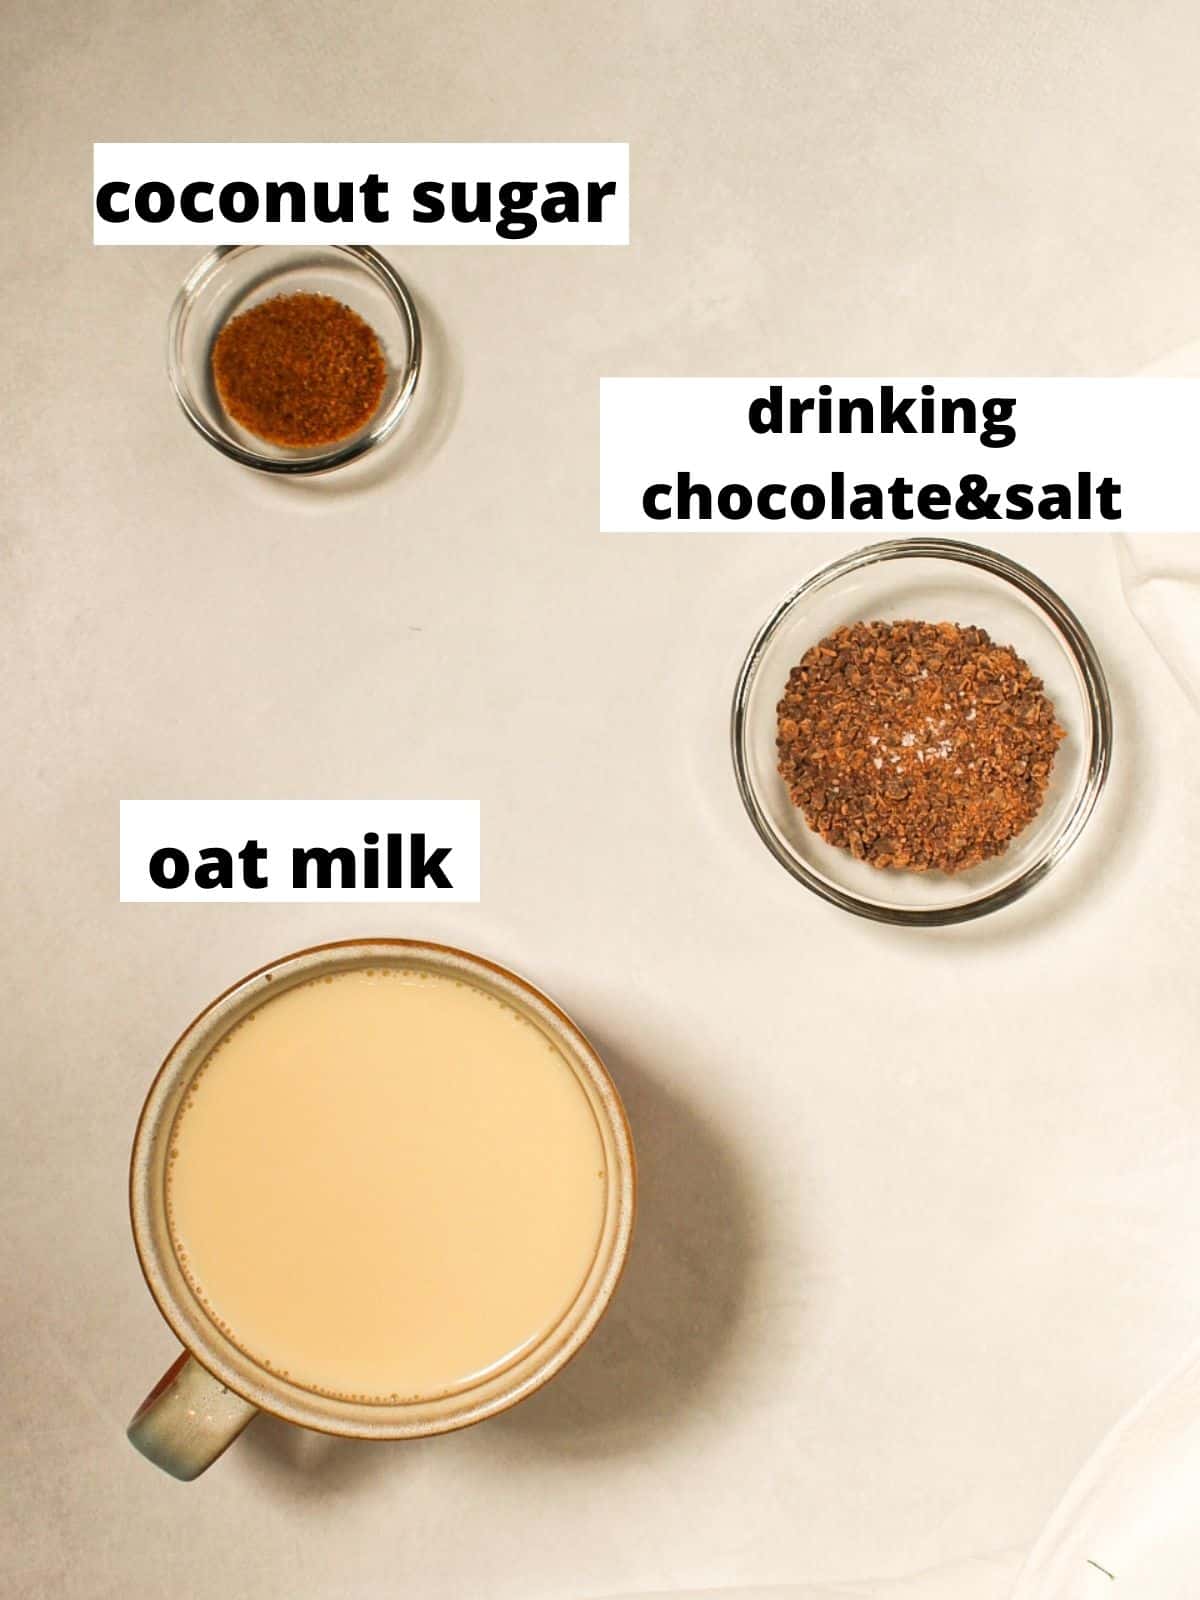 Labeled recipe ingredients on a white background. From top to bottom: coconut sugar, chocolate crumbles with salt, oat milk.